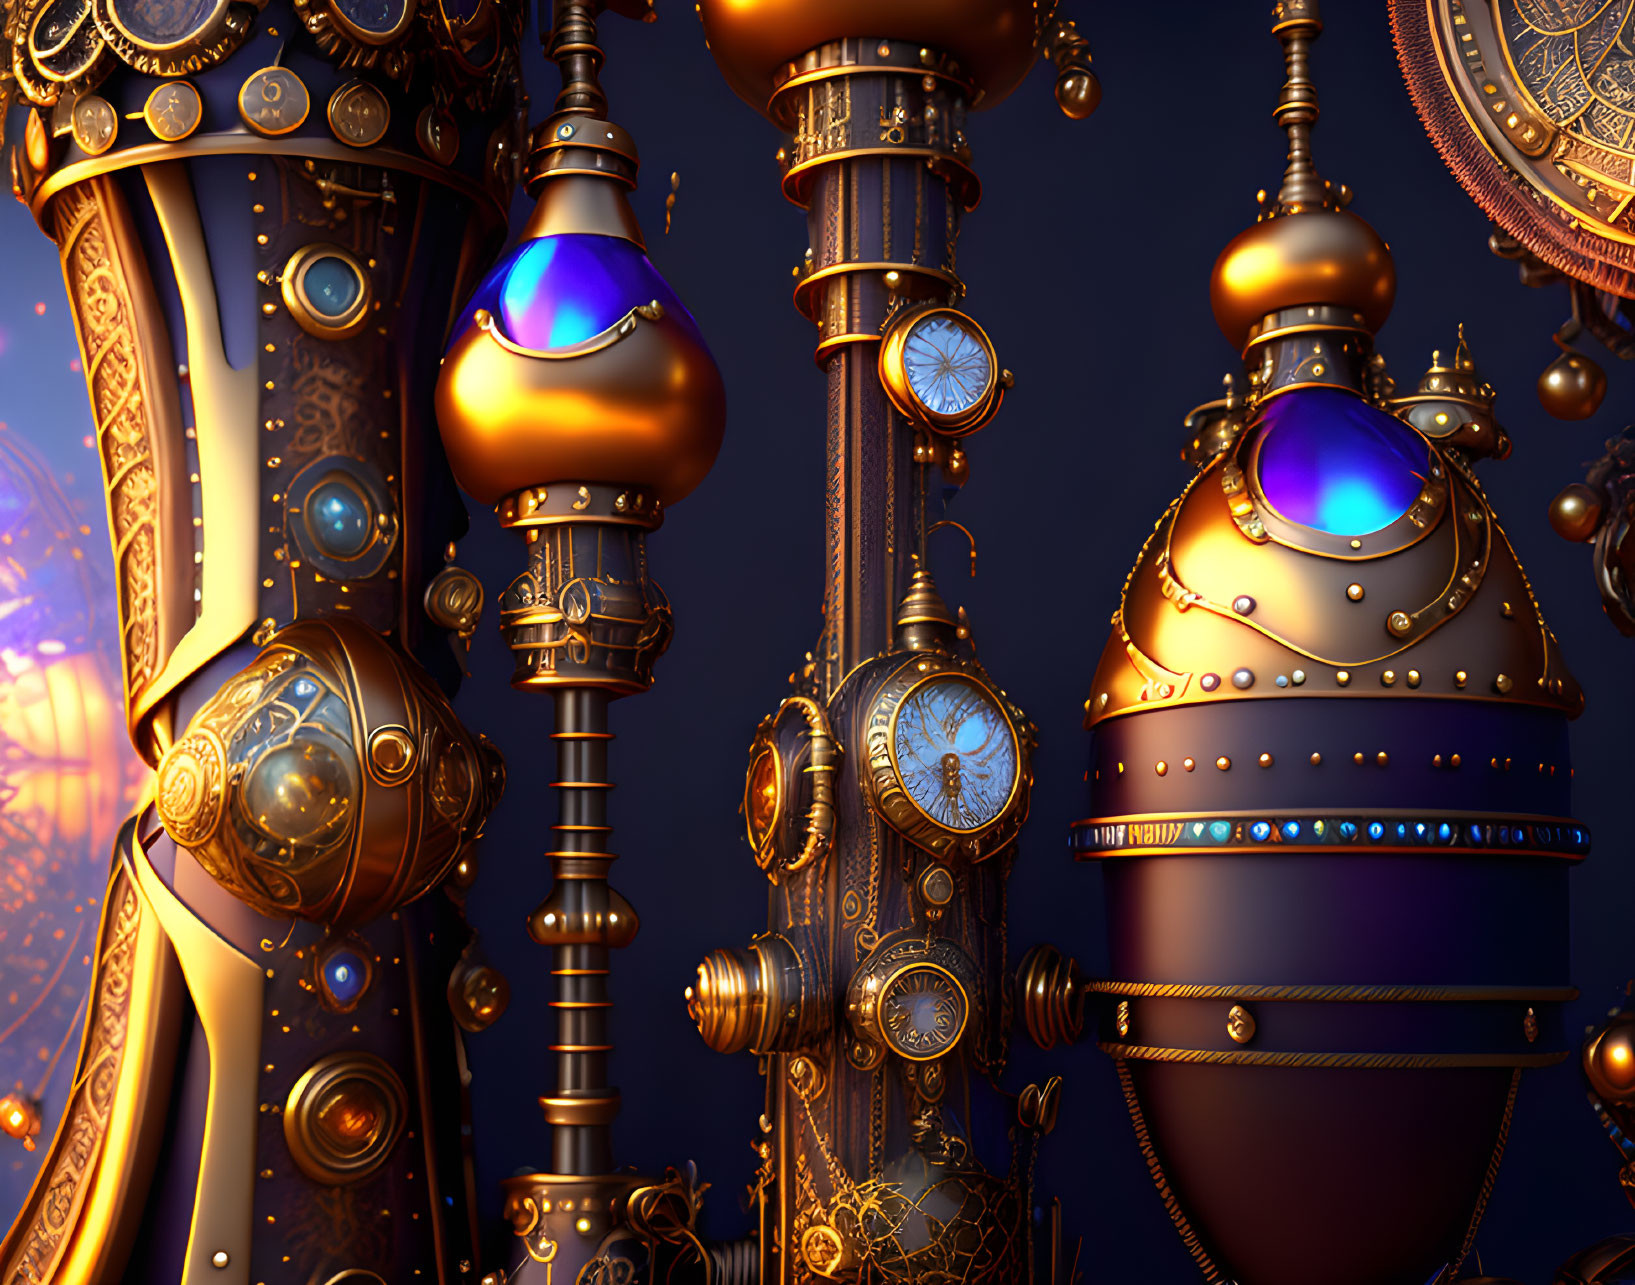 Detailed Steampunk Machinery with Metallic Textures and Glowing Elements